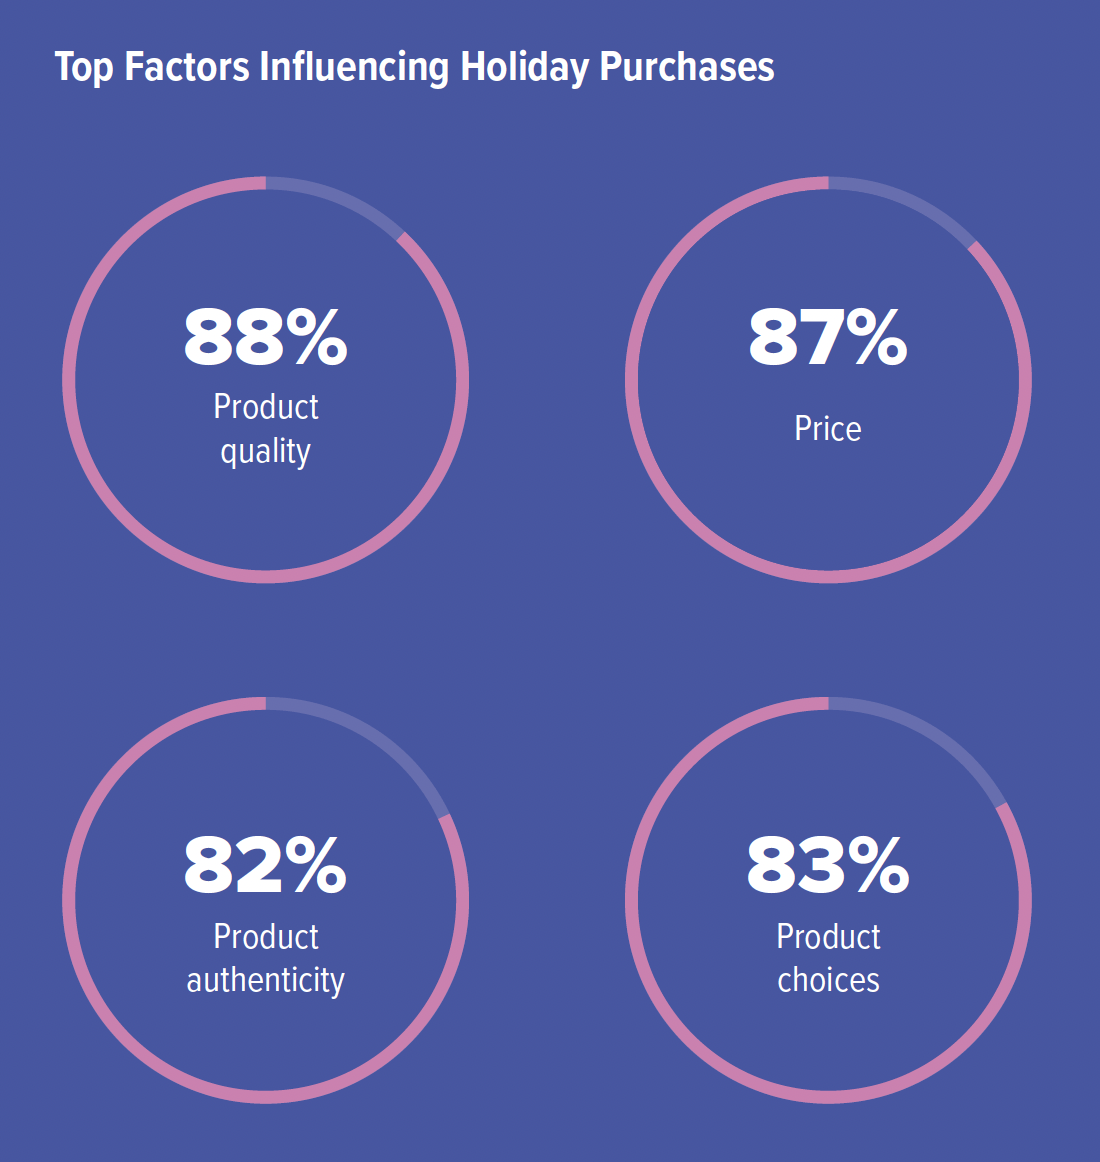 Top Factors Influencing Holiday Purchases